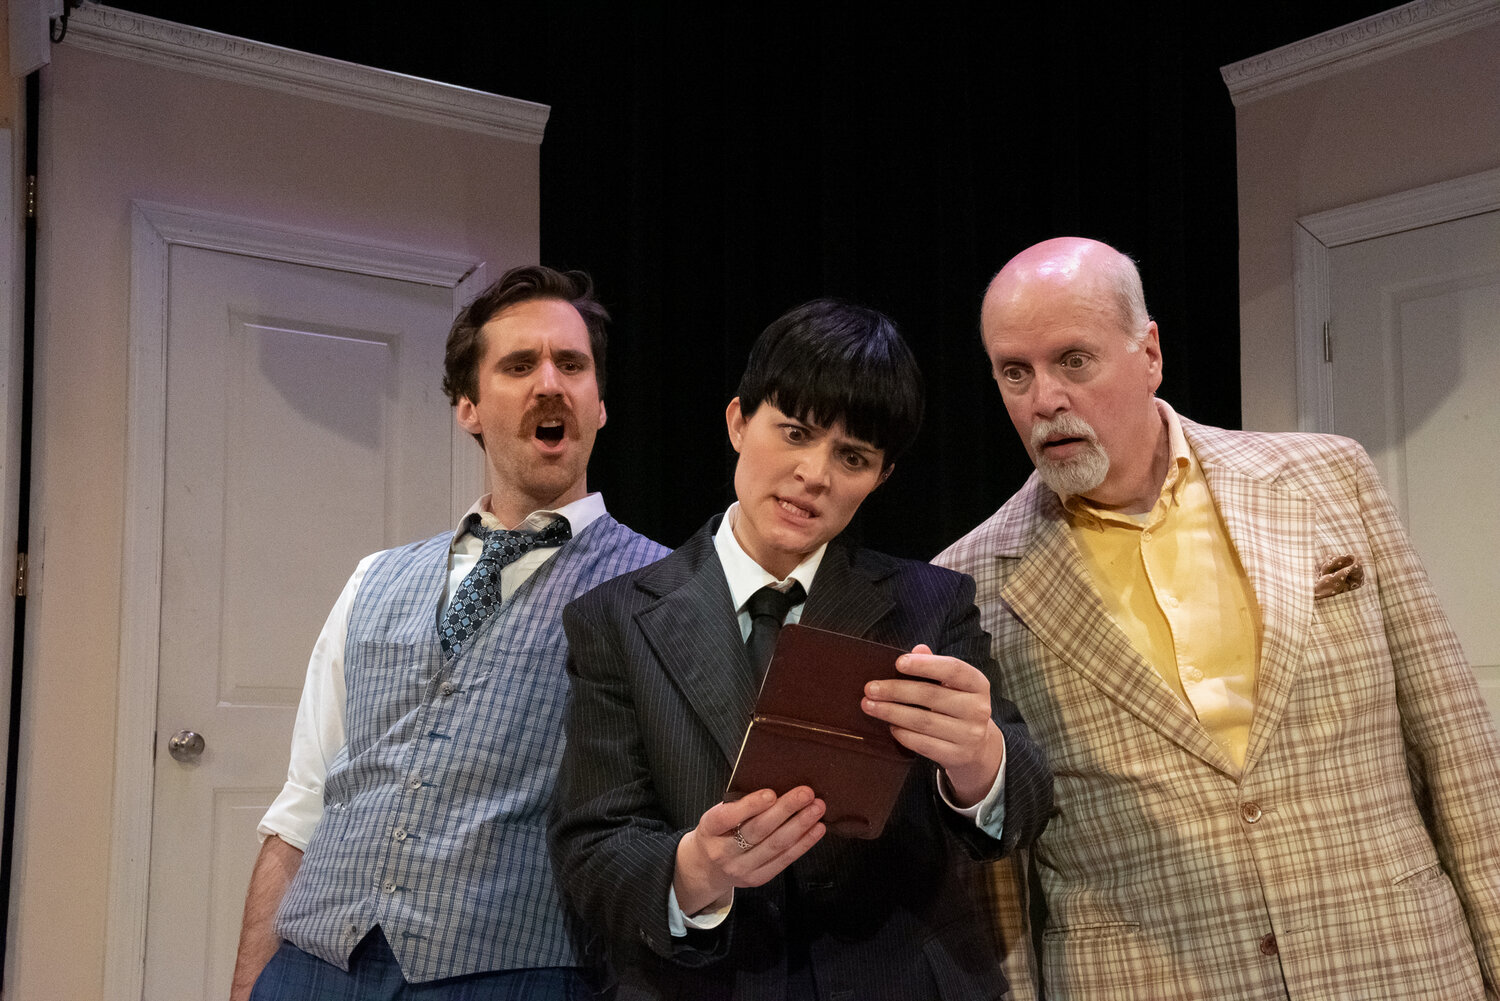 Rachel Crabbe in "One Man Two Guvnors" at Quintessence Theatre Group"